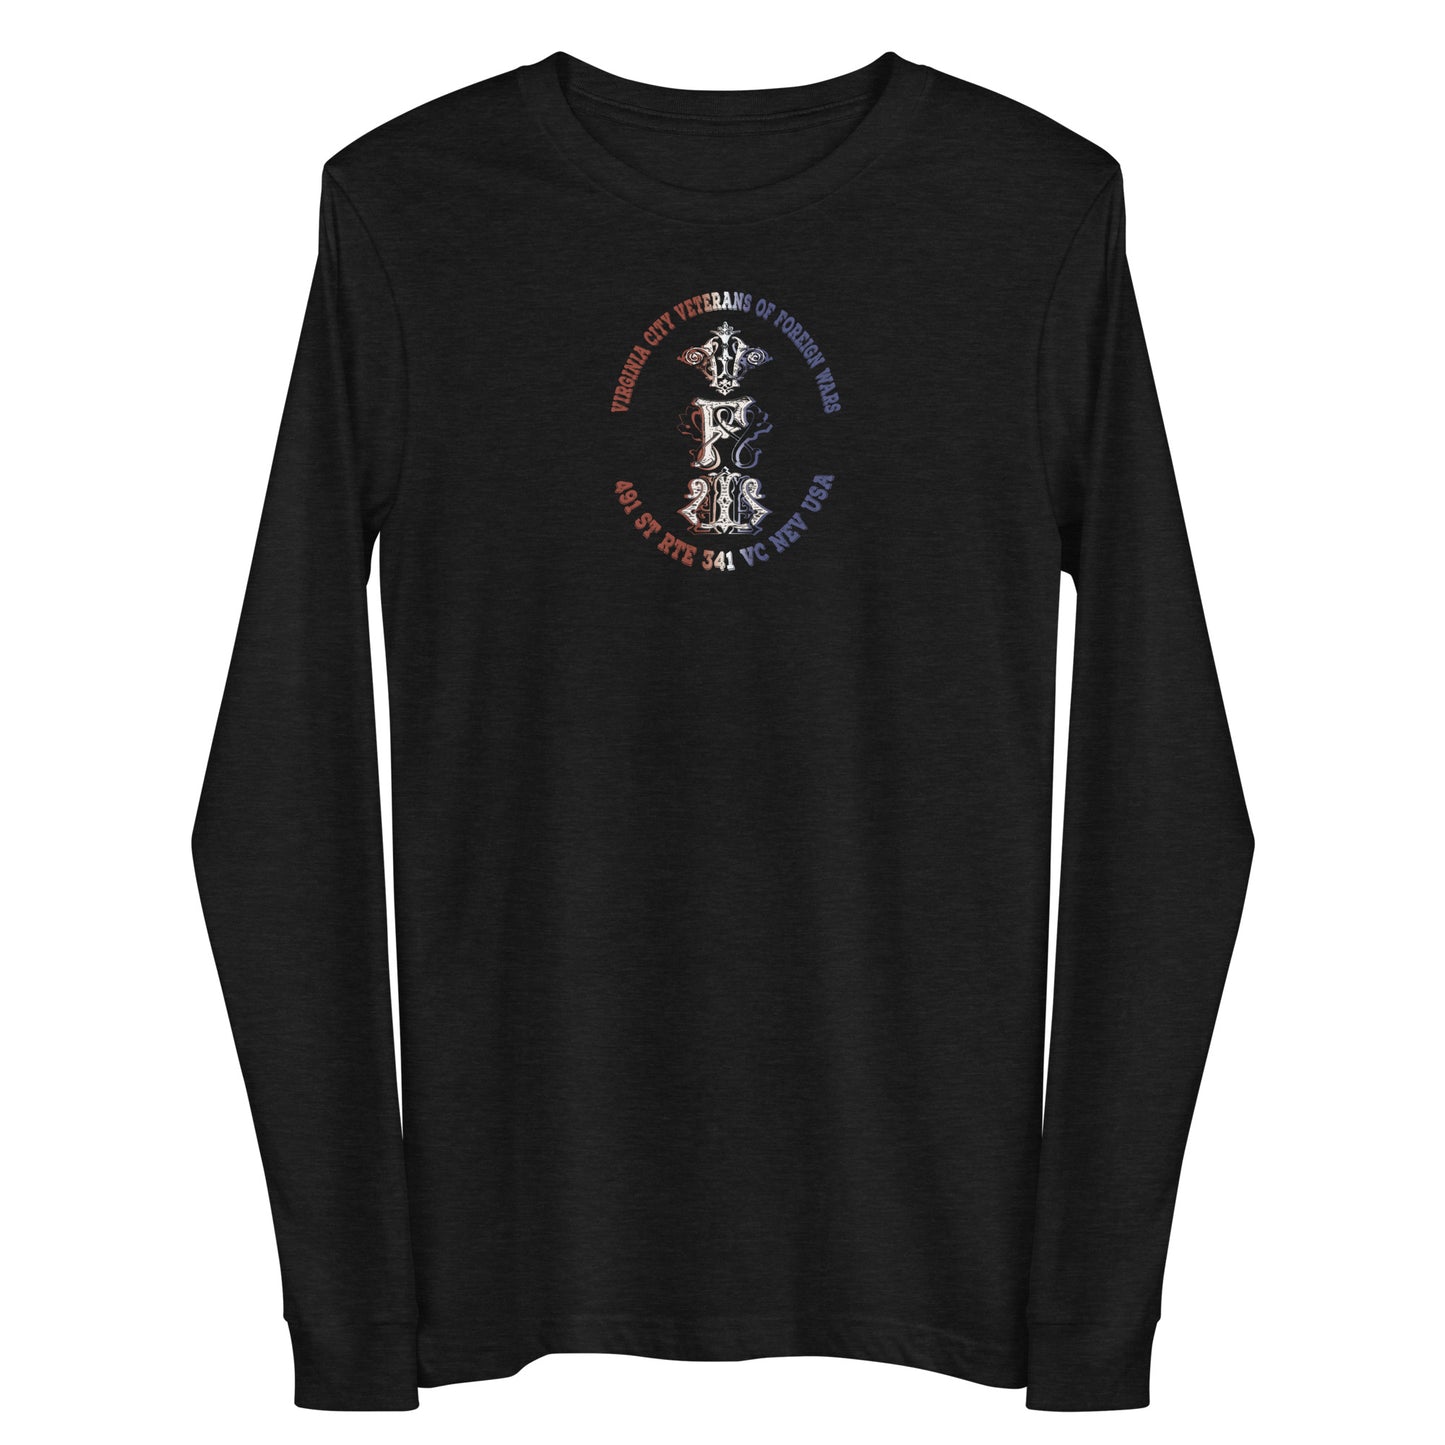 Women's Long Sleeve Tee for the VC VFW Women's Shirts Virginia City Motorcycle Company Apparel in Nevada USA